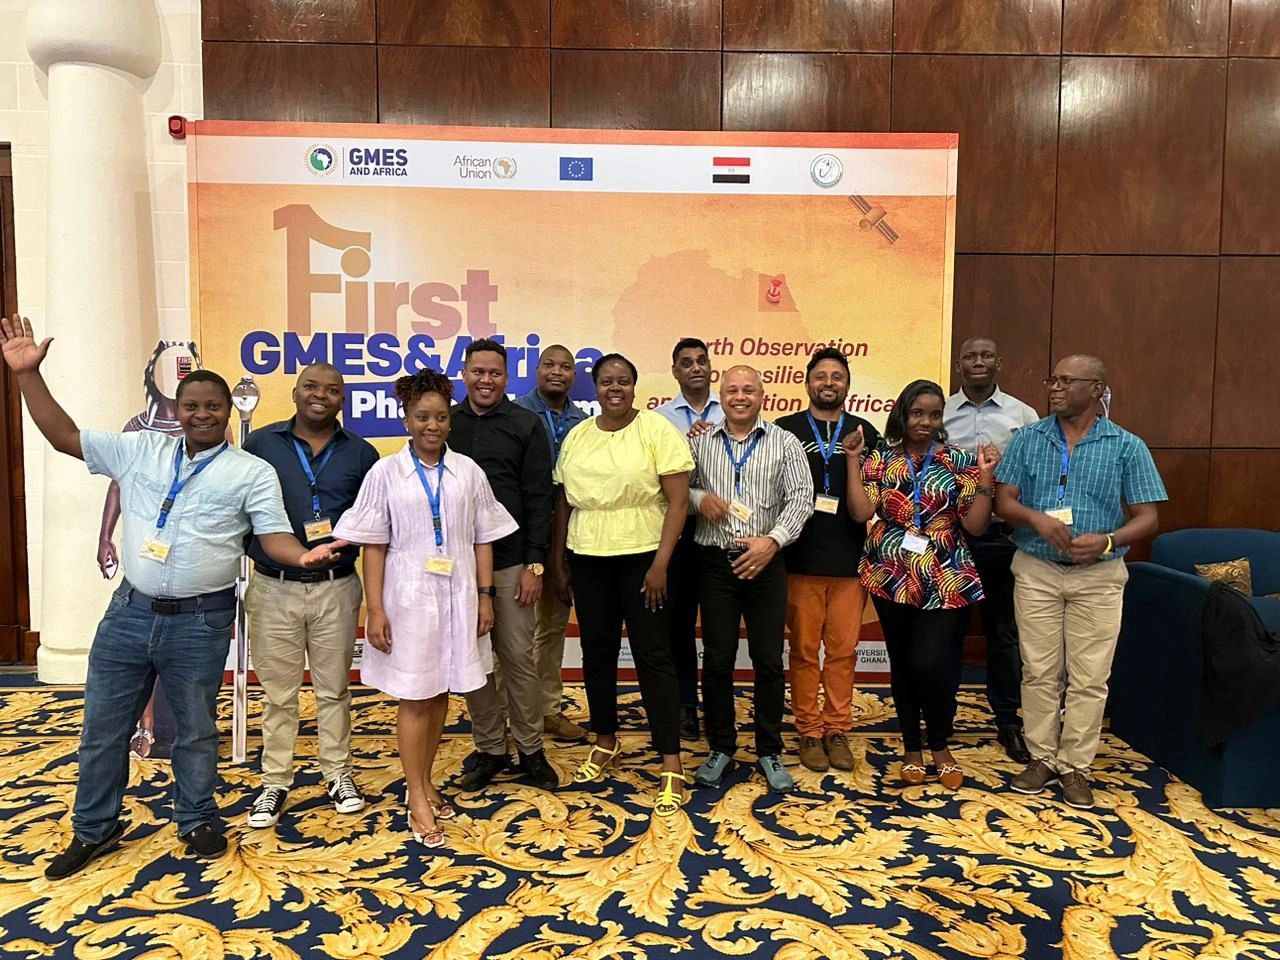 Dr Emmanuel Mbaru and other (front left) and other members of Marine & Coastal Operations for Southern Africa and the Indian Ocean (MARCOSIO) consortium during the GMES&Africa Forum in Sham El Sheikh, Egypt| Photo courtesy WIOMSA